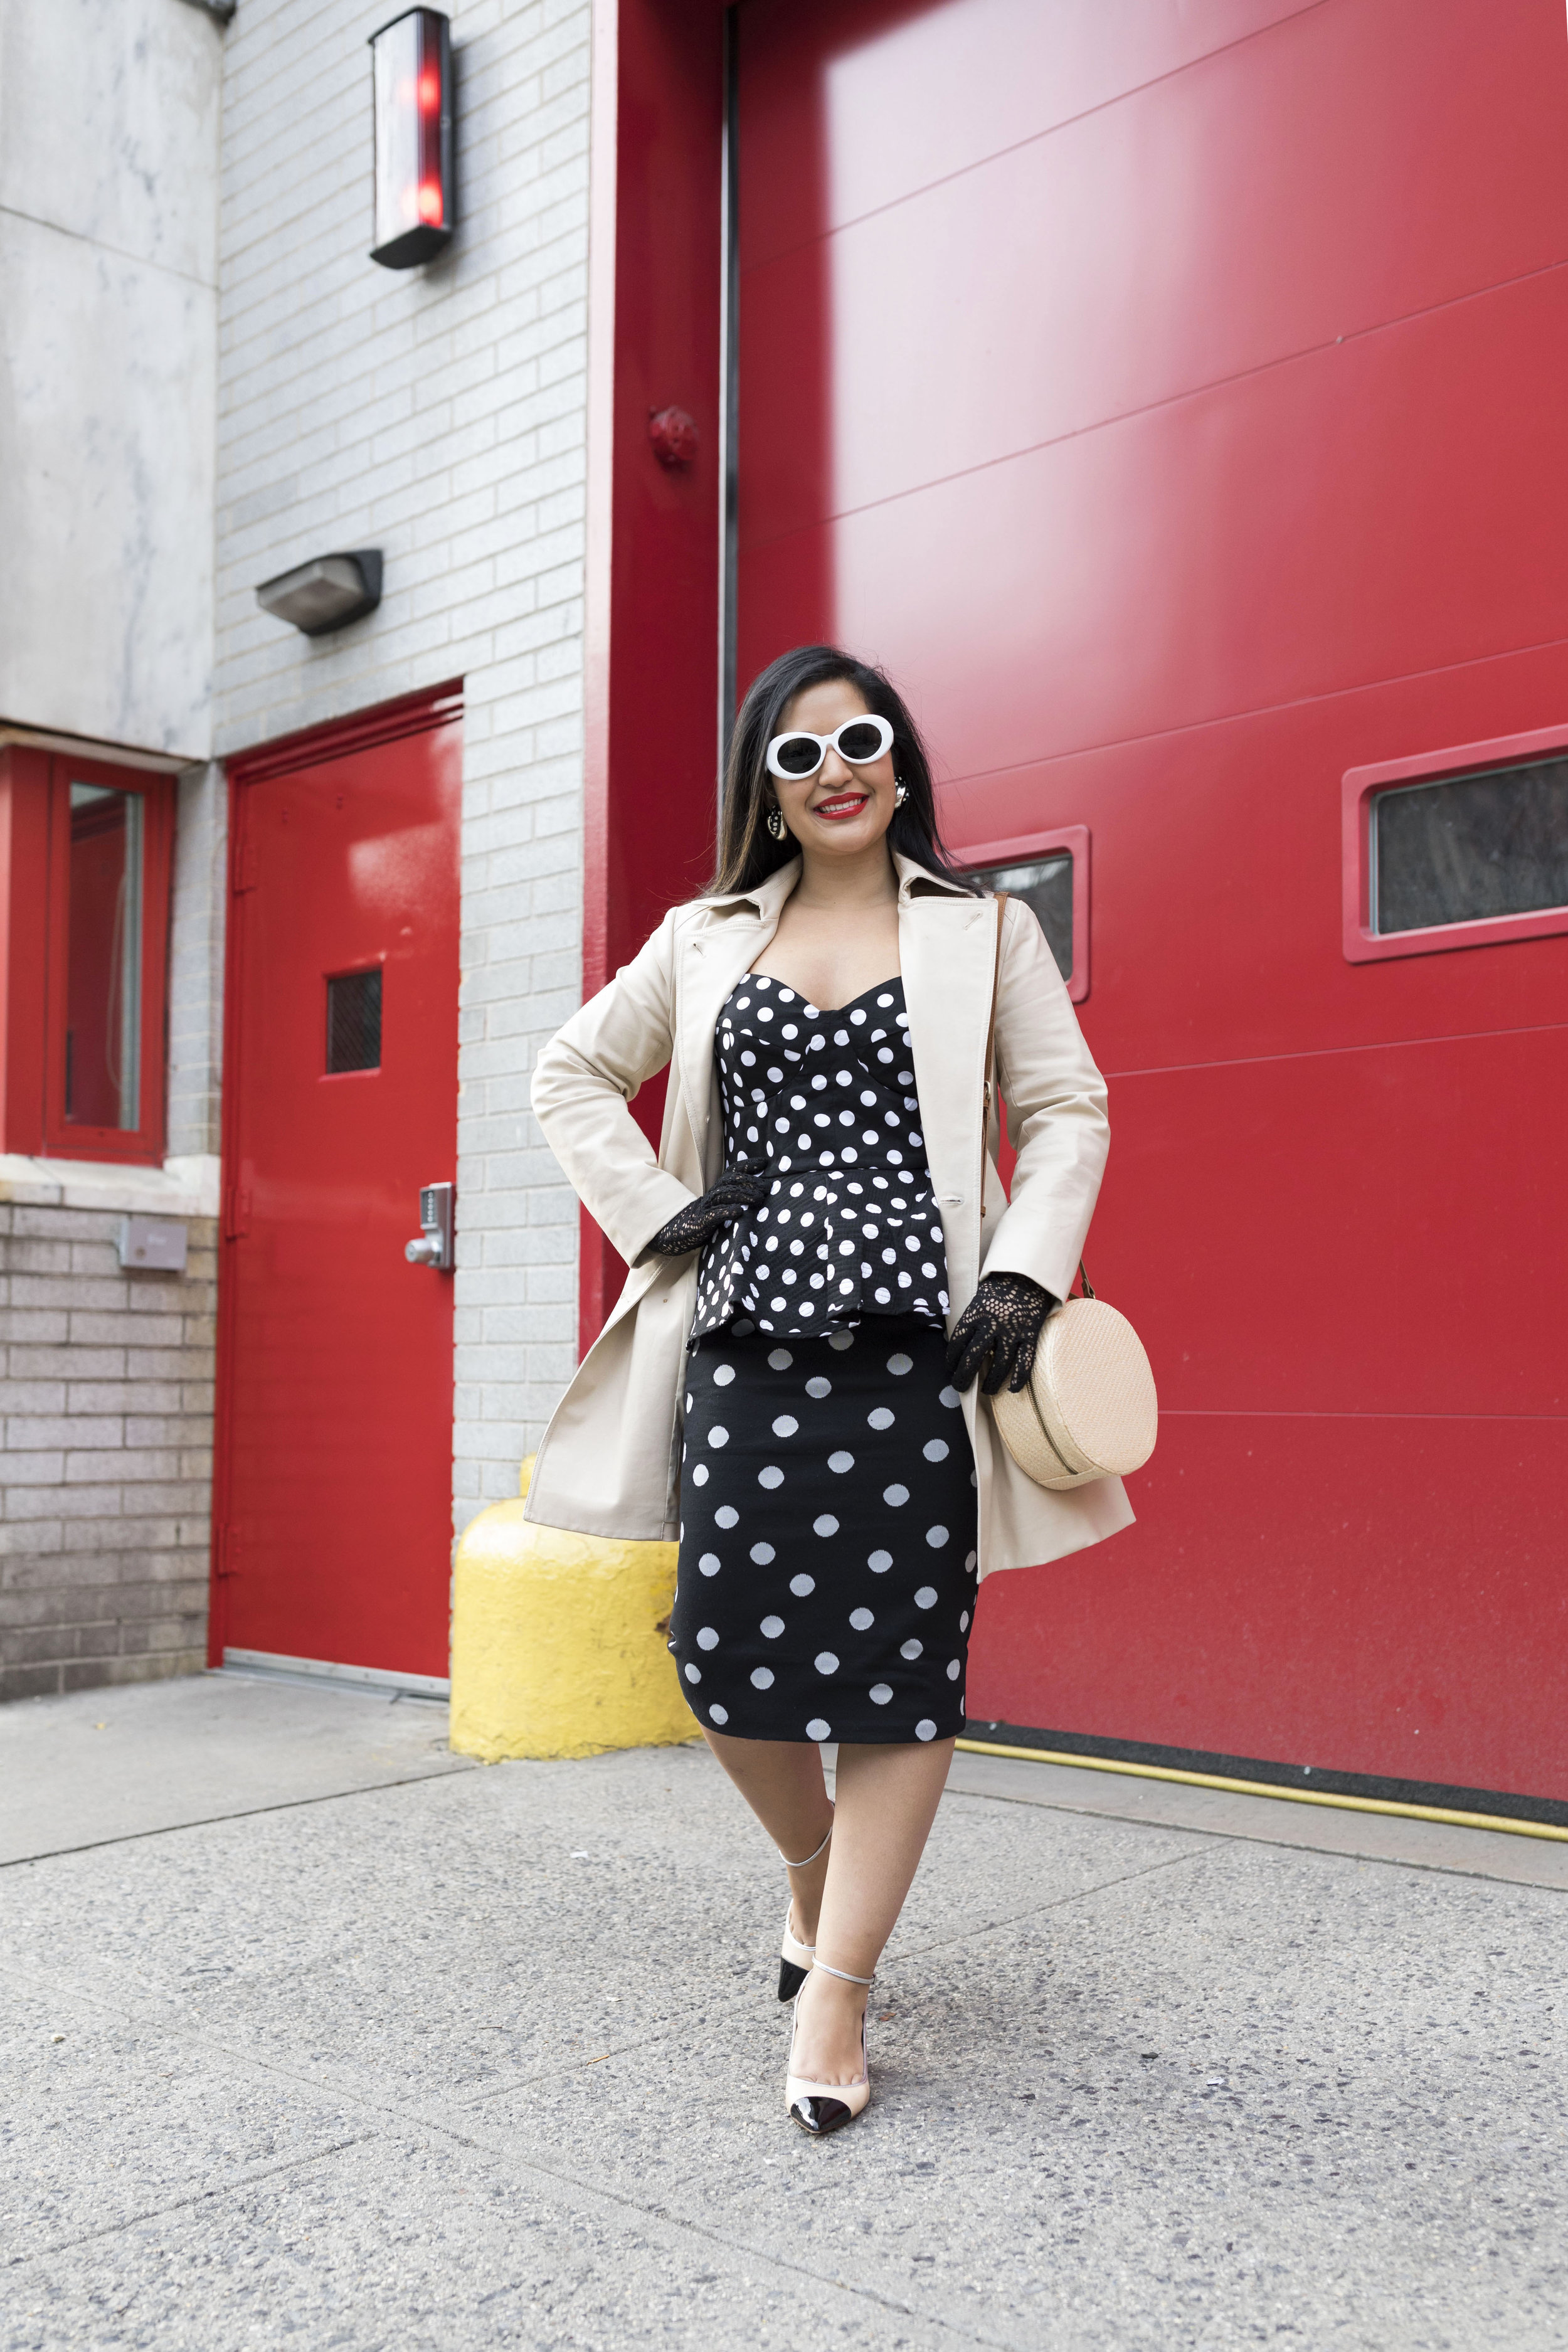 Krity S x Polka Dots x Spring Outfit11.jpg